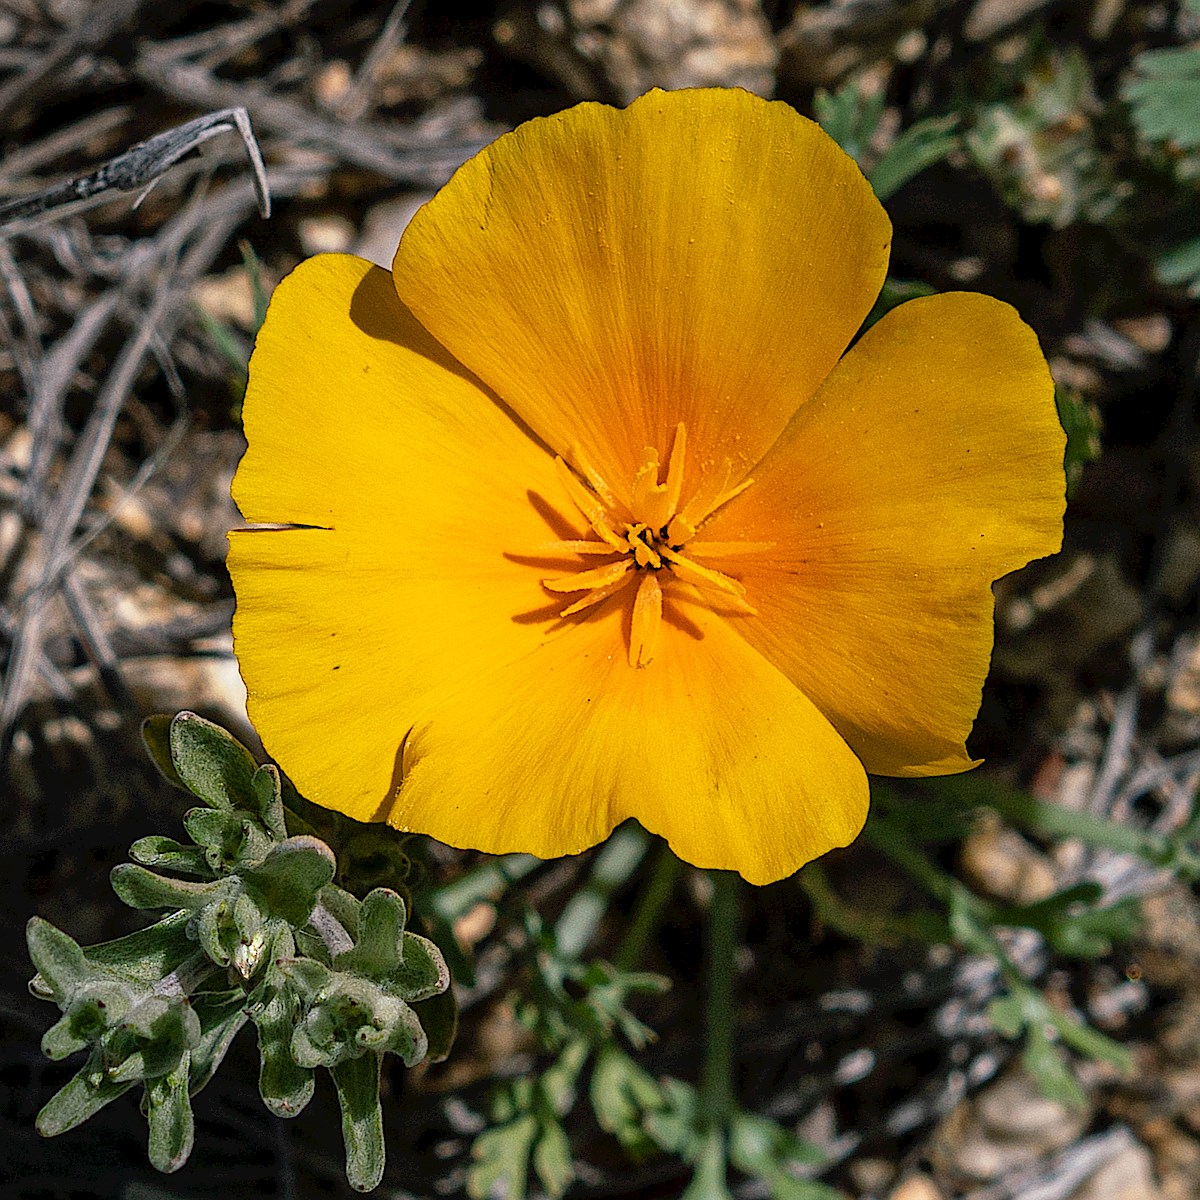 Poppy just off Soldier Trail. February 2019.